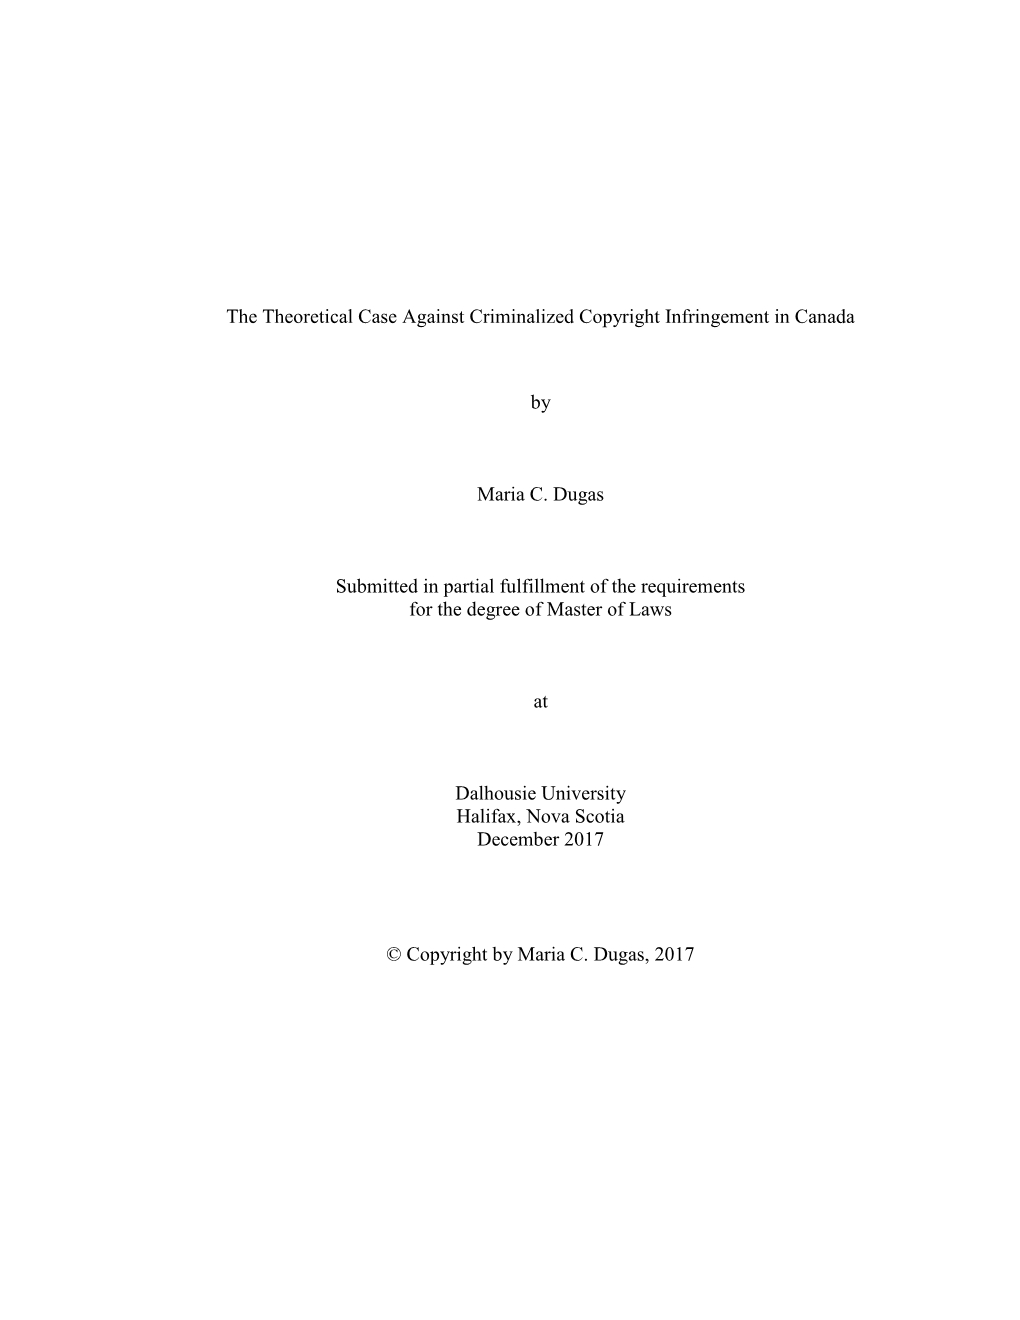 The Theoretical Case Against Criminalized Copyright Infringement in Canada by Maria C. Dugas Submitted in Partial Fulfillment Of